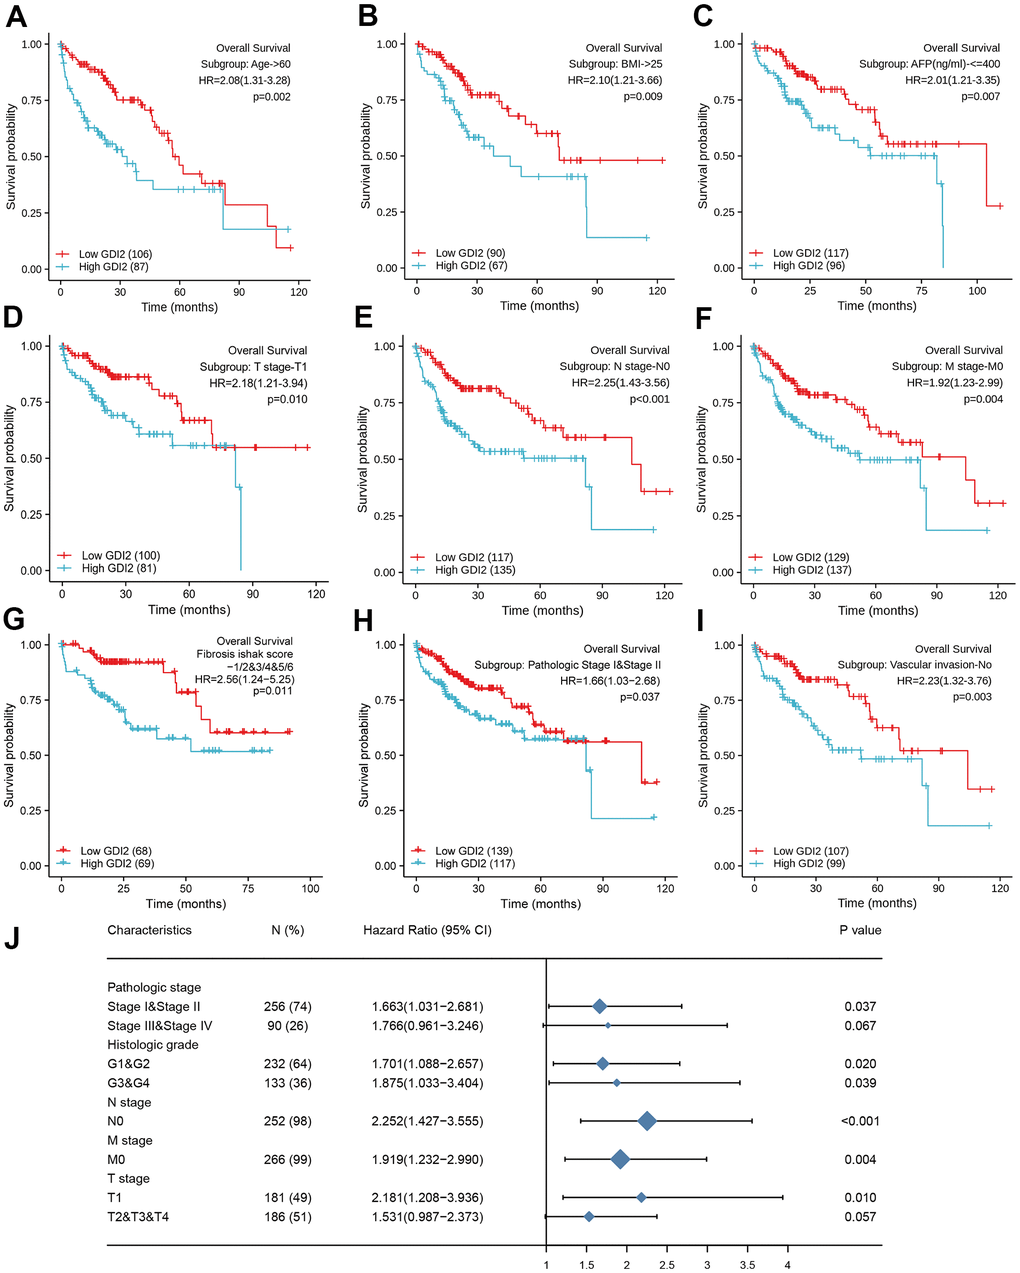 Prognostic impact of clinical subtypes associated with GDI2 expression in HCC patients. (A–I) High GDI2 expression was associated with poor outcomes on overall survival (OS) in HCC patients of a TCGA cohort with clinicopathological indicators as: (A) Age>60; (B) BMI>25; (C) AFP(ng/ml)D) T1 Stage; (E) N0 Stage; (F) M0 Stage; (G) Fibrosis ishak score-1/2&3/4&5/6; (H) Pathologic Stage I&II; and (I) No Vascular invasion. Blue: high GDI2; Red: low GDI2. *P **P J) Forest map illustrated subtypes of clinicopathological features associated with GDI2 expression for HCC prognosis. *P **P 